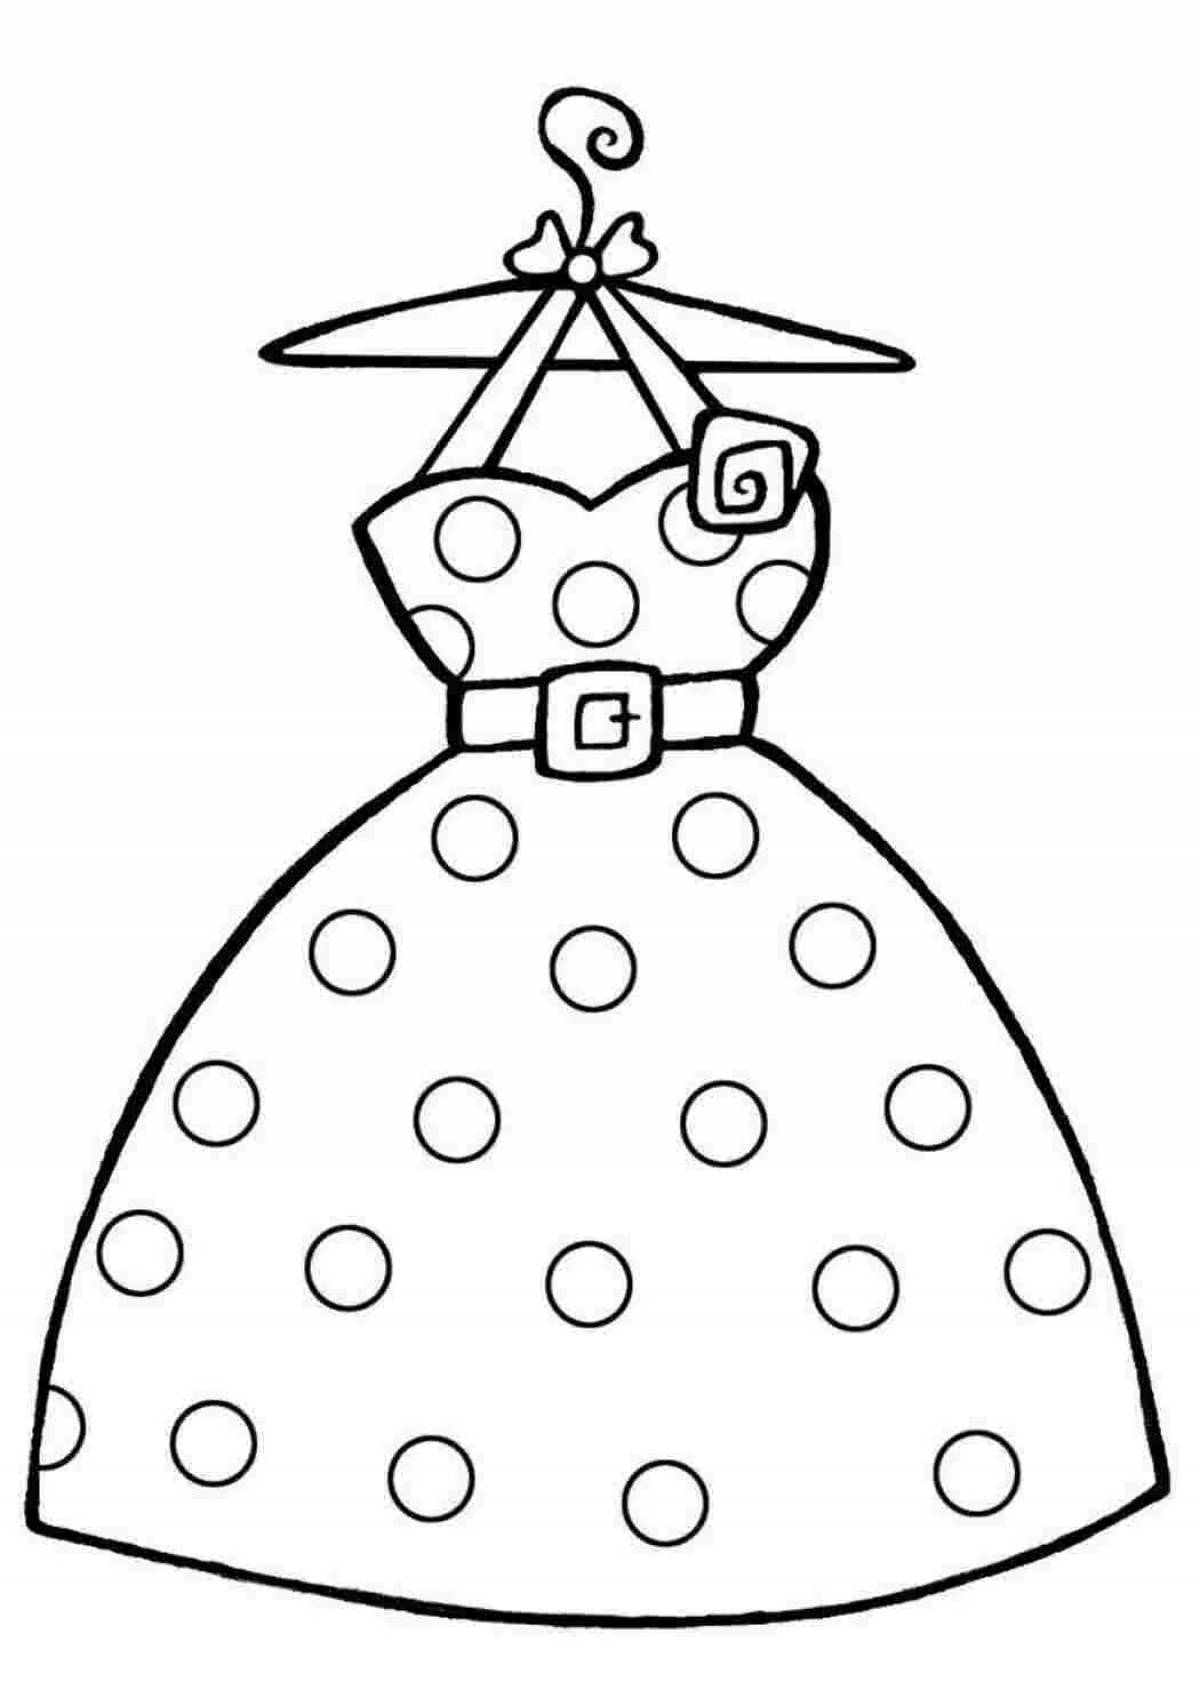 Outstanding dress coloring page for 4-5 year olds